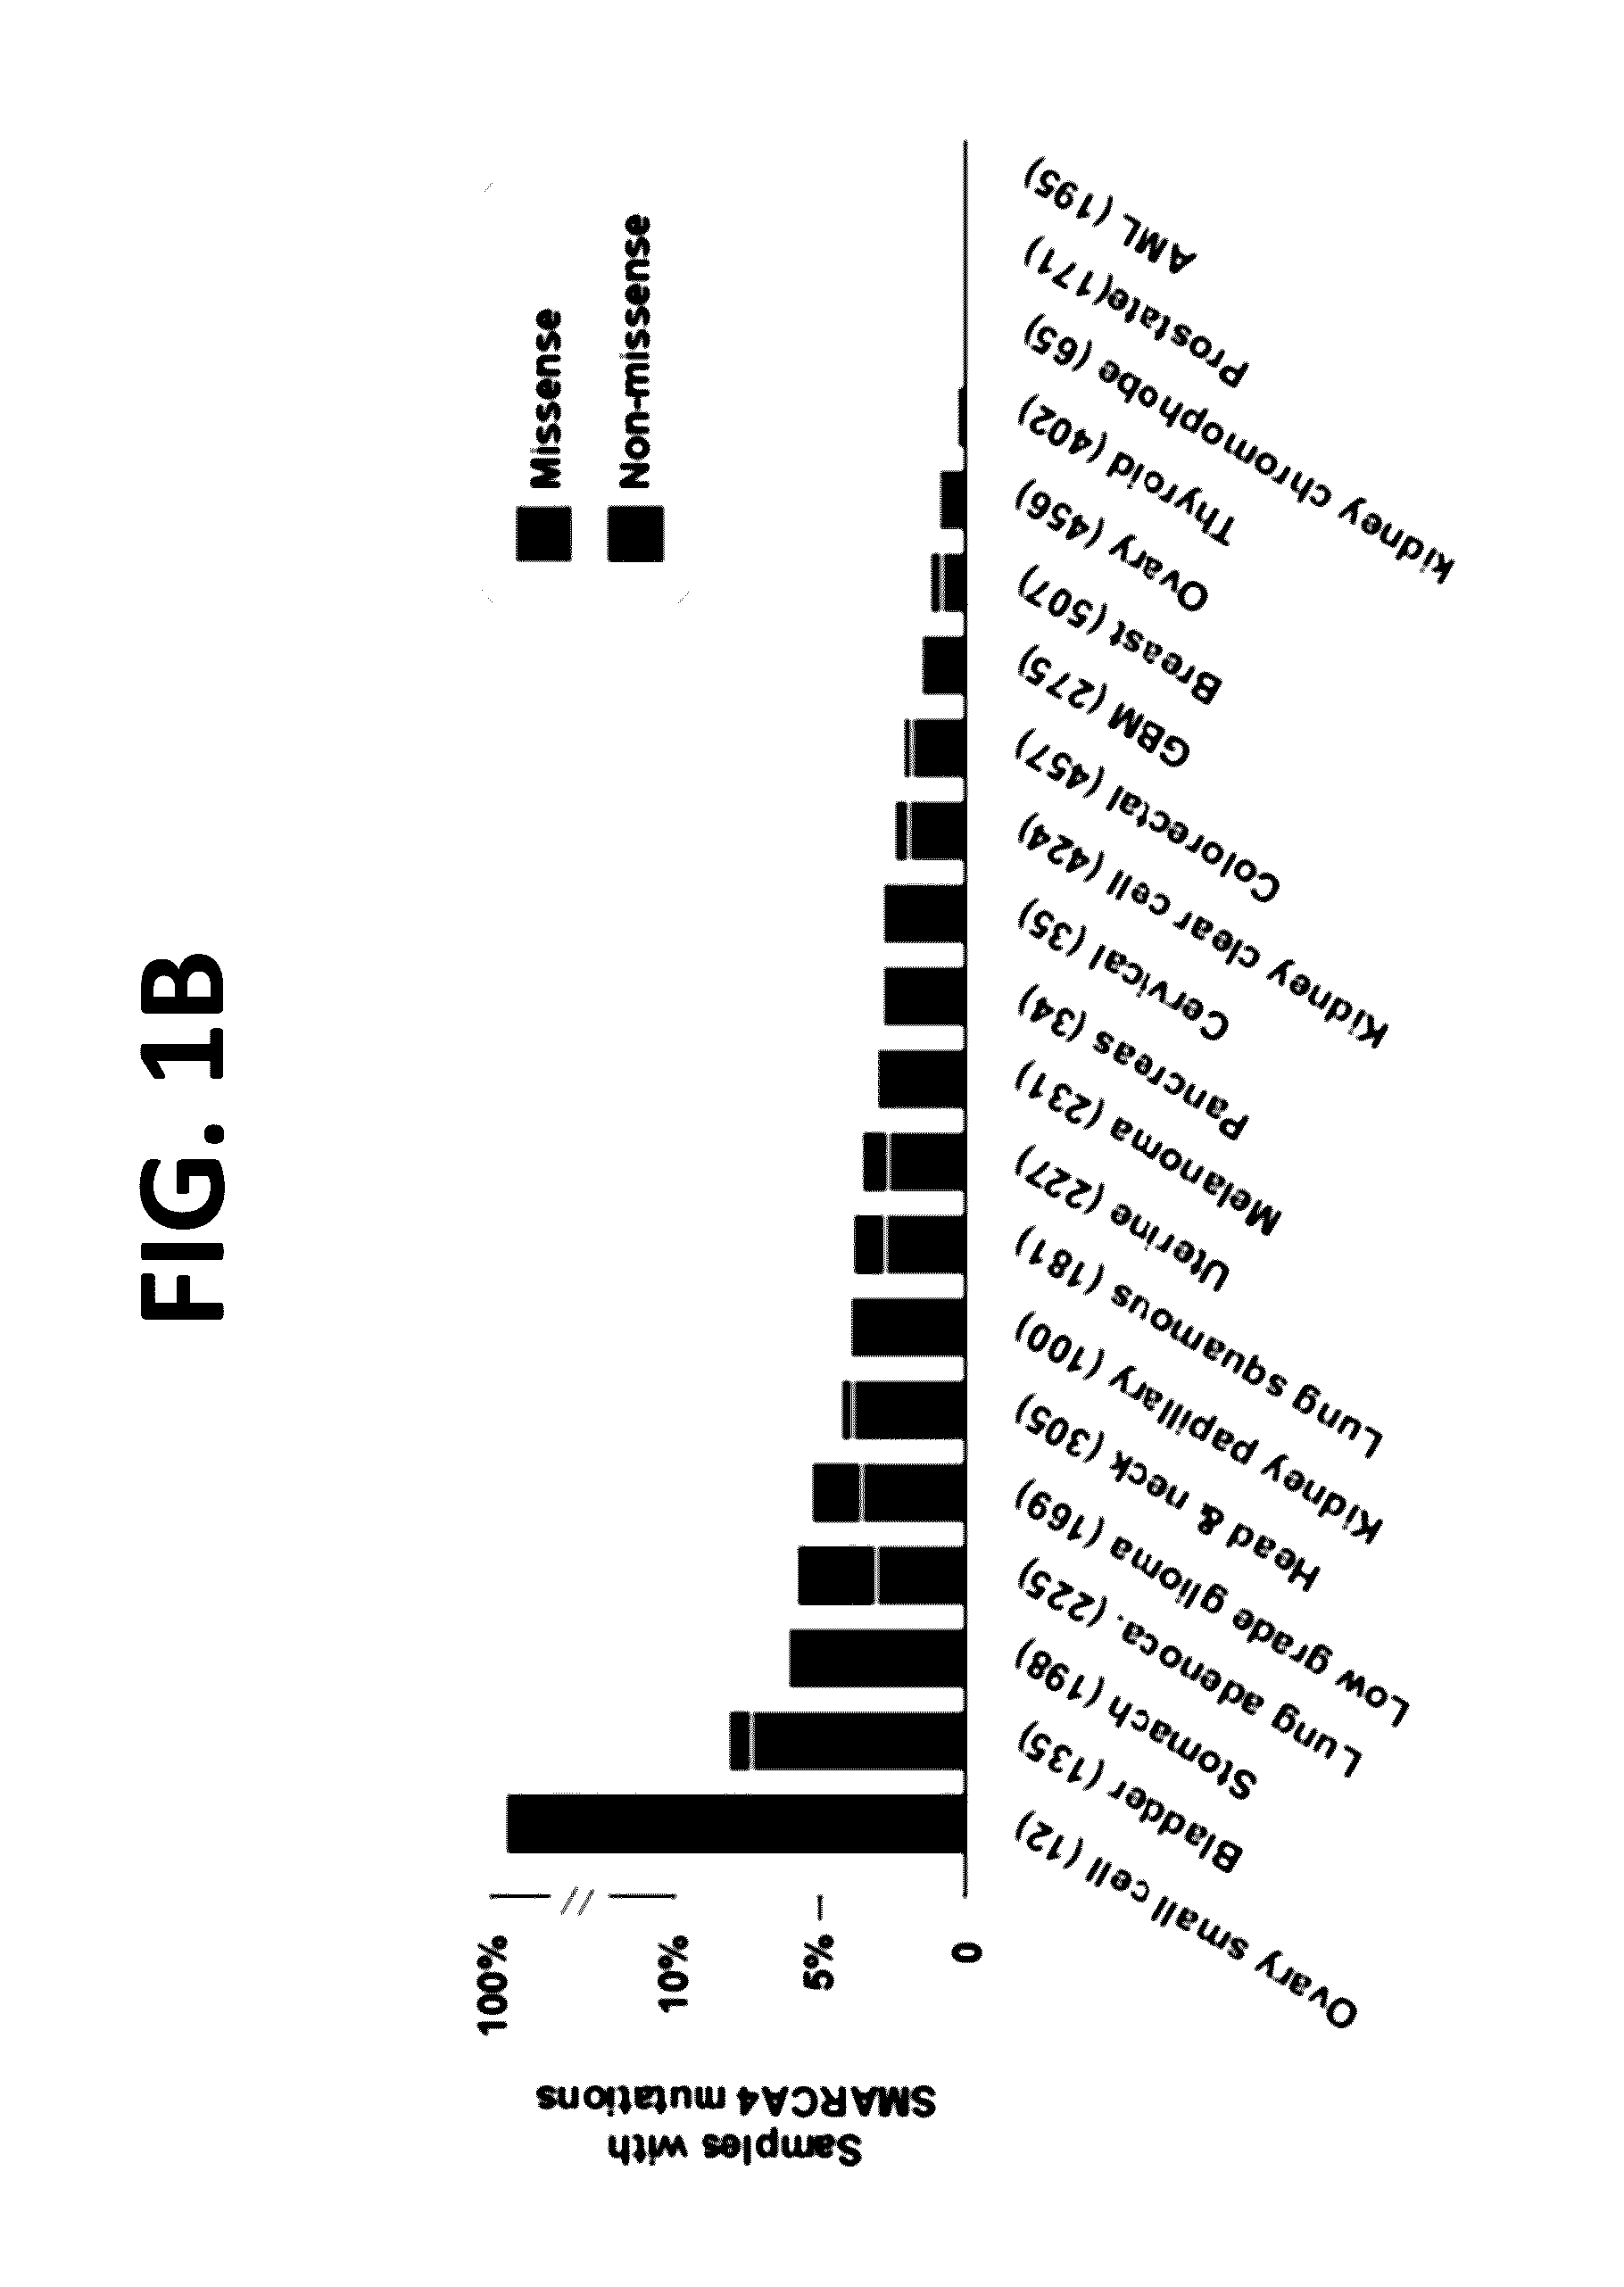 Compositions and methods for the diagnosis and treatment of ovarian cancers that are associated with reduced smarca4 gene expression or protein function